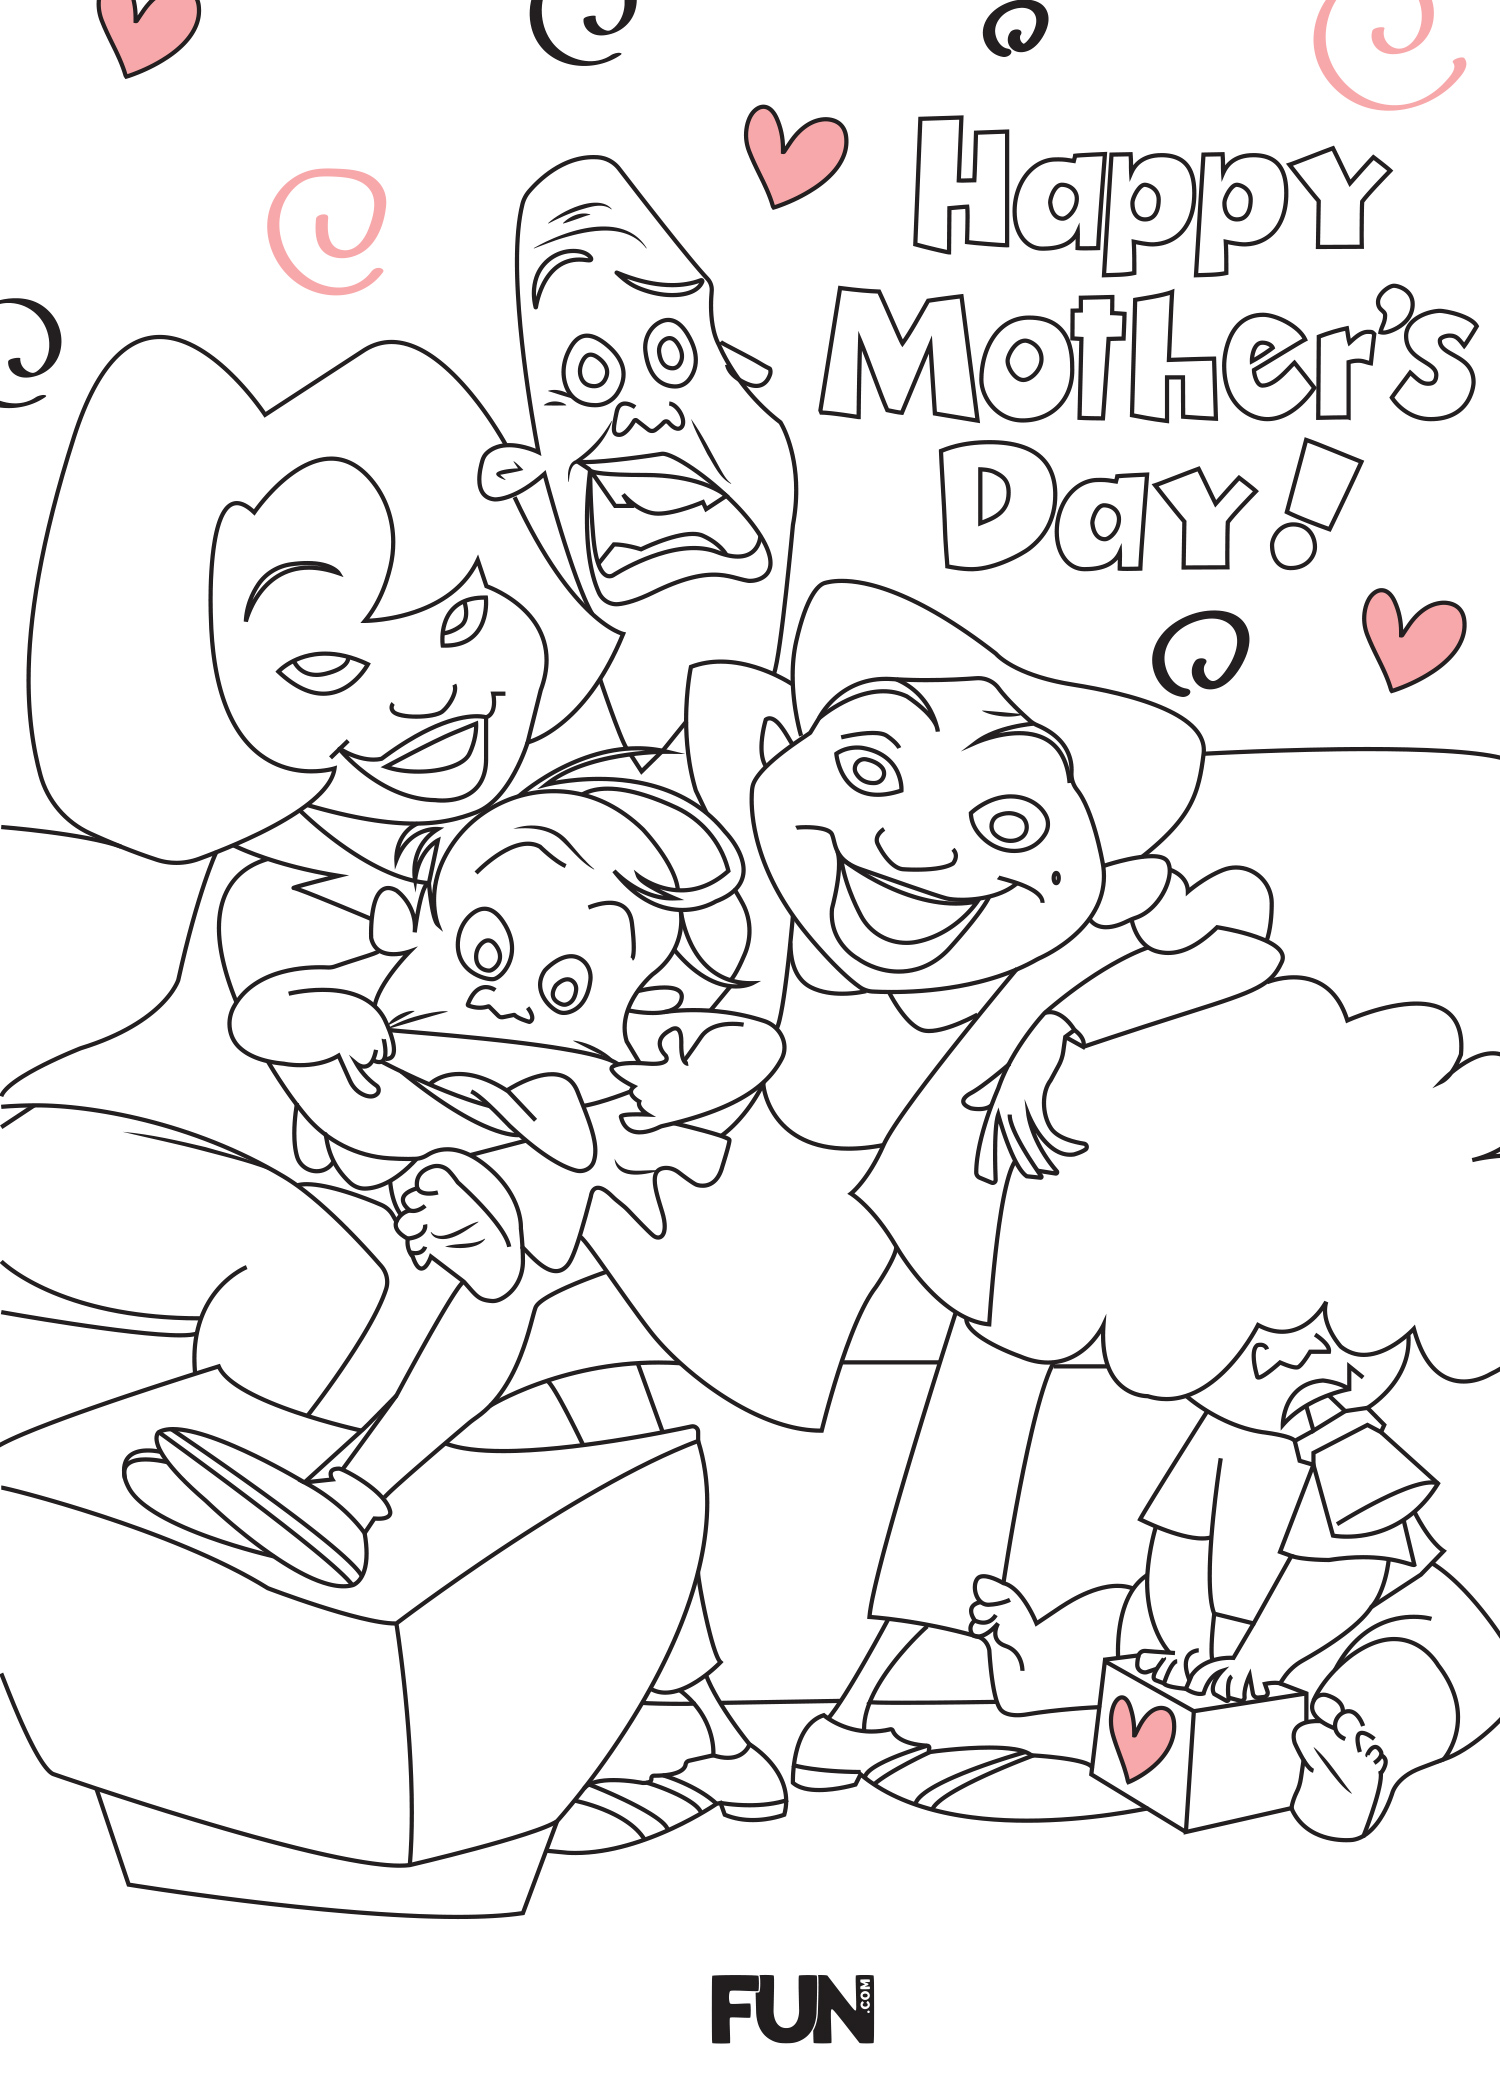 Geeky Mother's Day Coloring Cards to Win Mom Points [Printables] - FUN.com  Blog